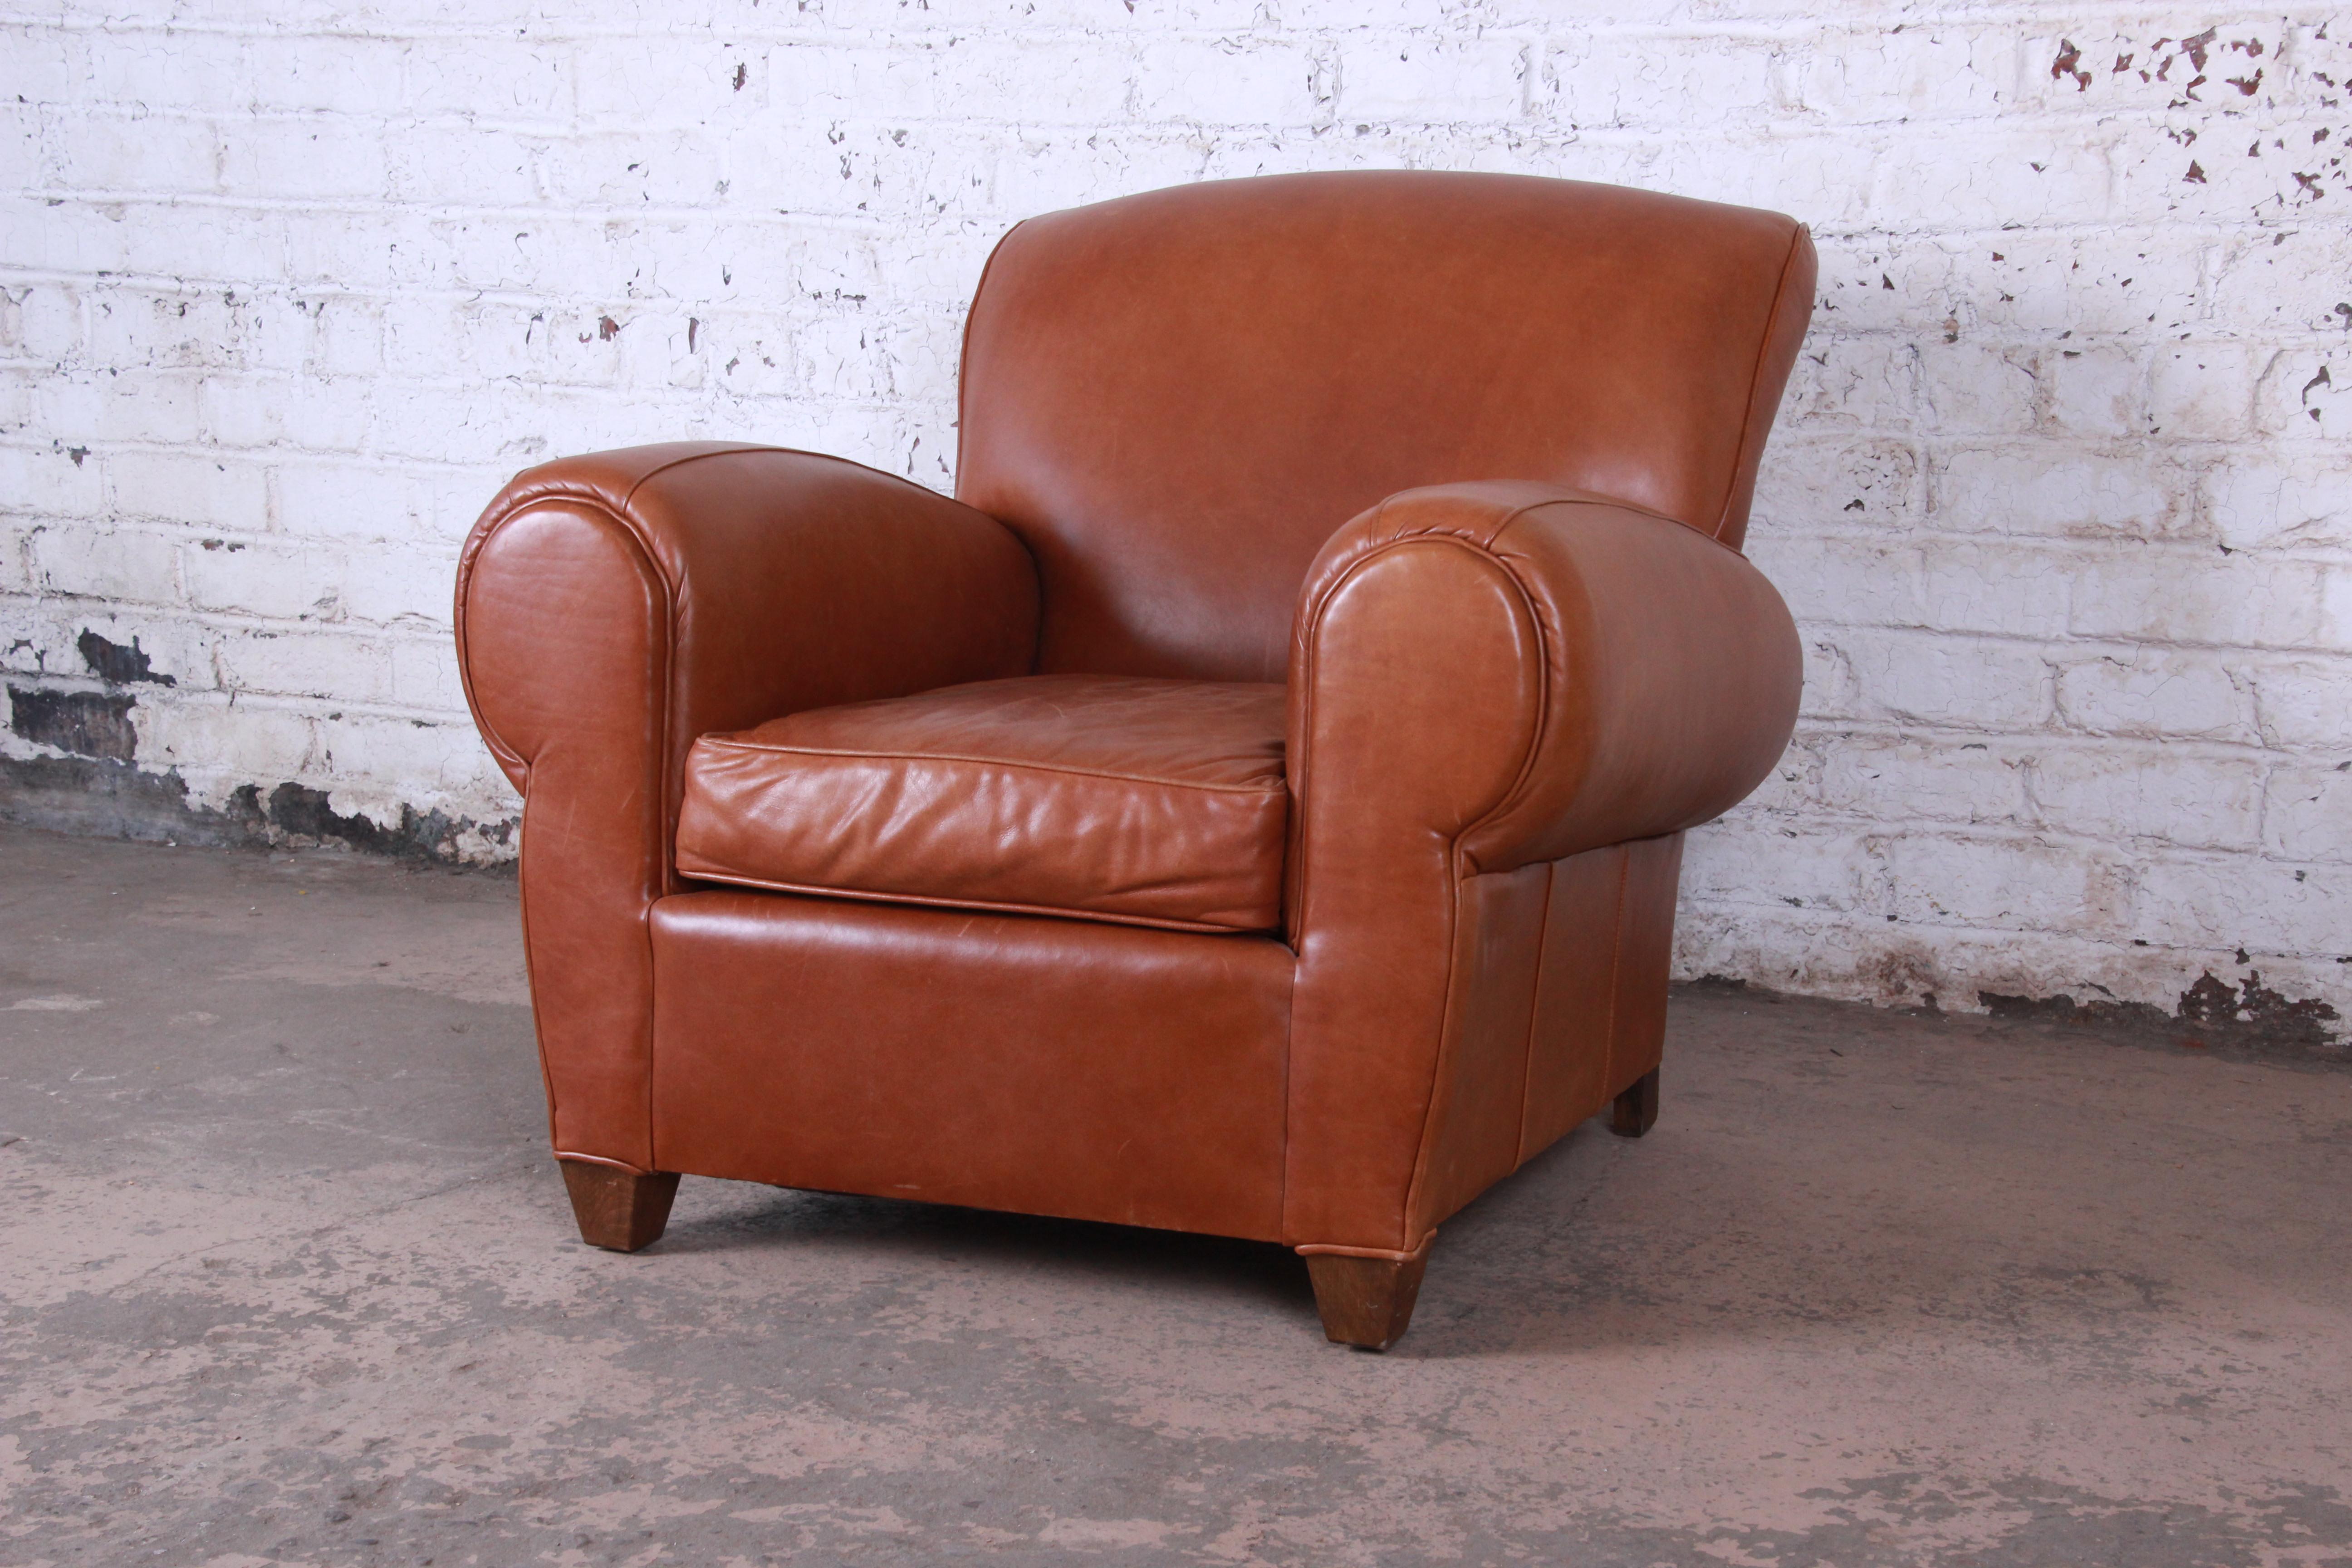 A stylish and comfortable brown leather club chair by Mitchell Gold. The chair features soft high-end brown leather and a beautiful Art Deco design. The leather shows minor surface wear from age and use, but overall the chair is in very good